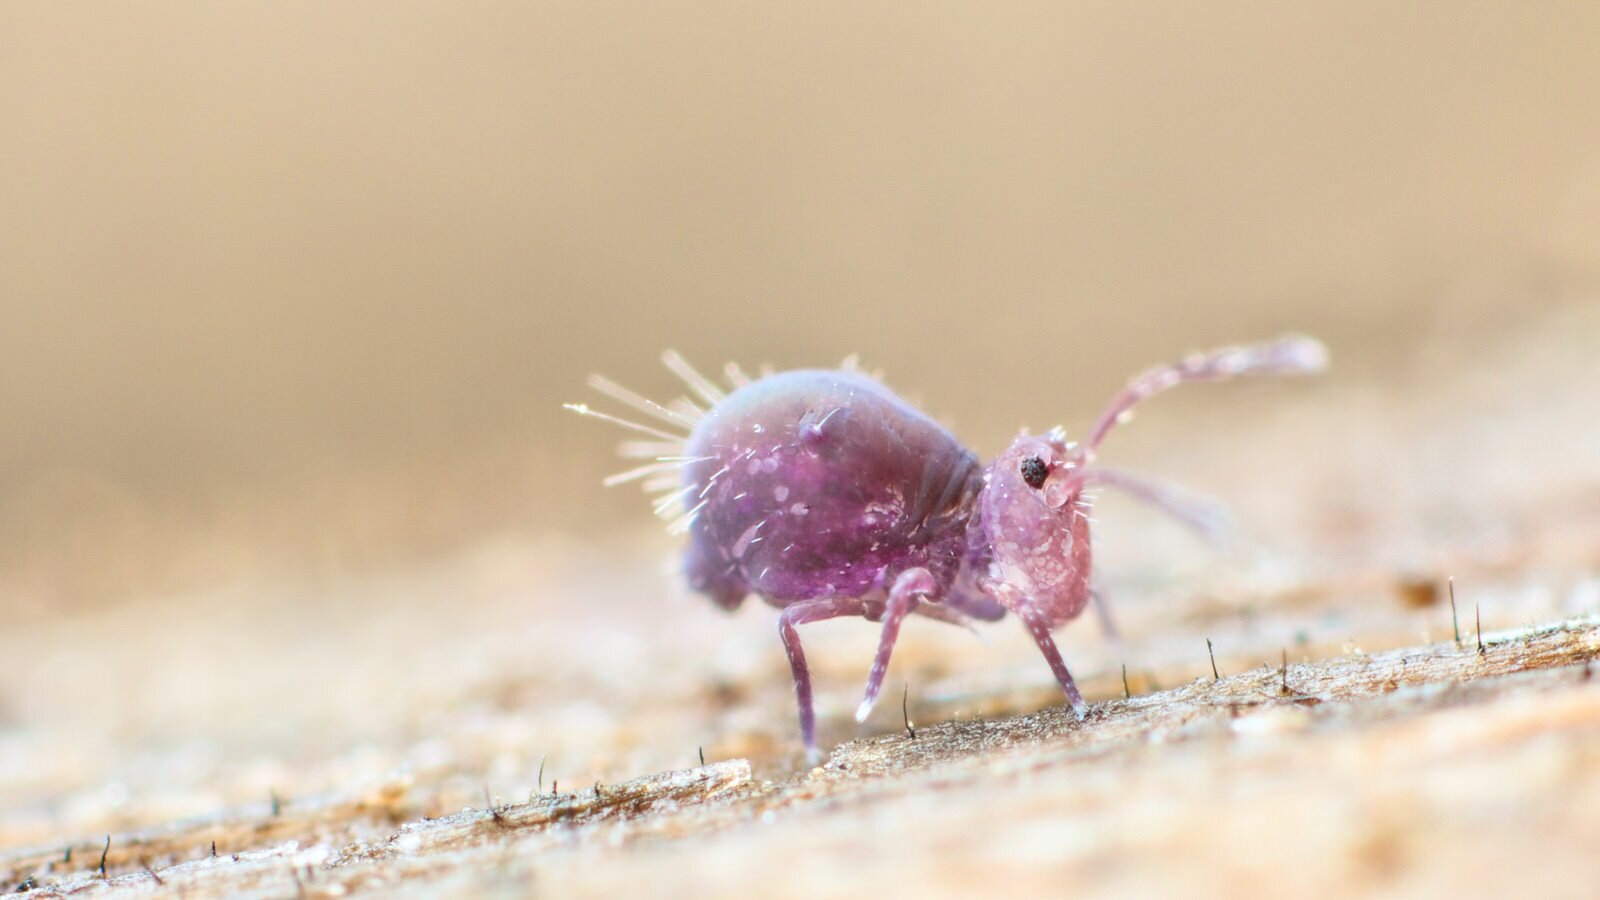 All about Collembola or springtails - A Chaos of Delight